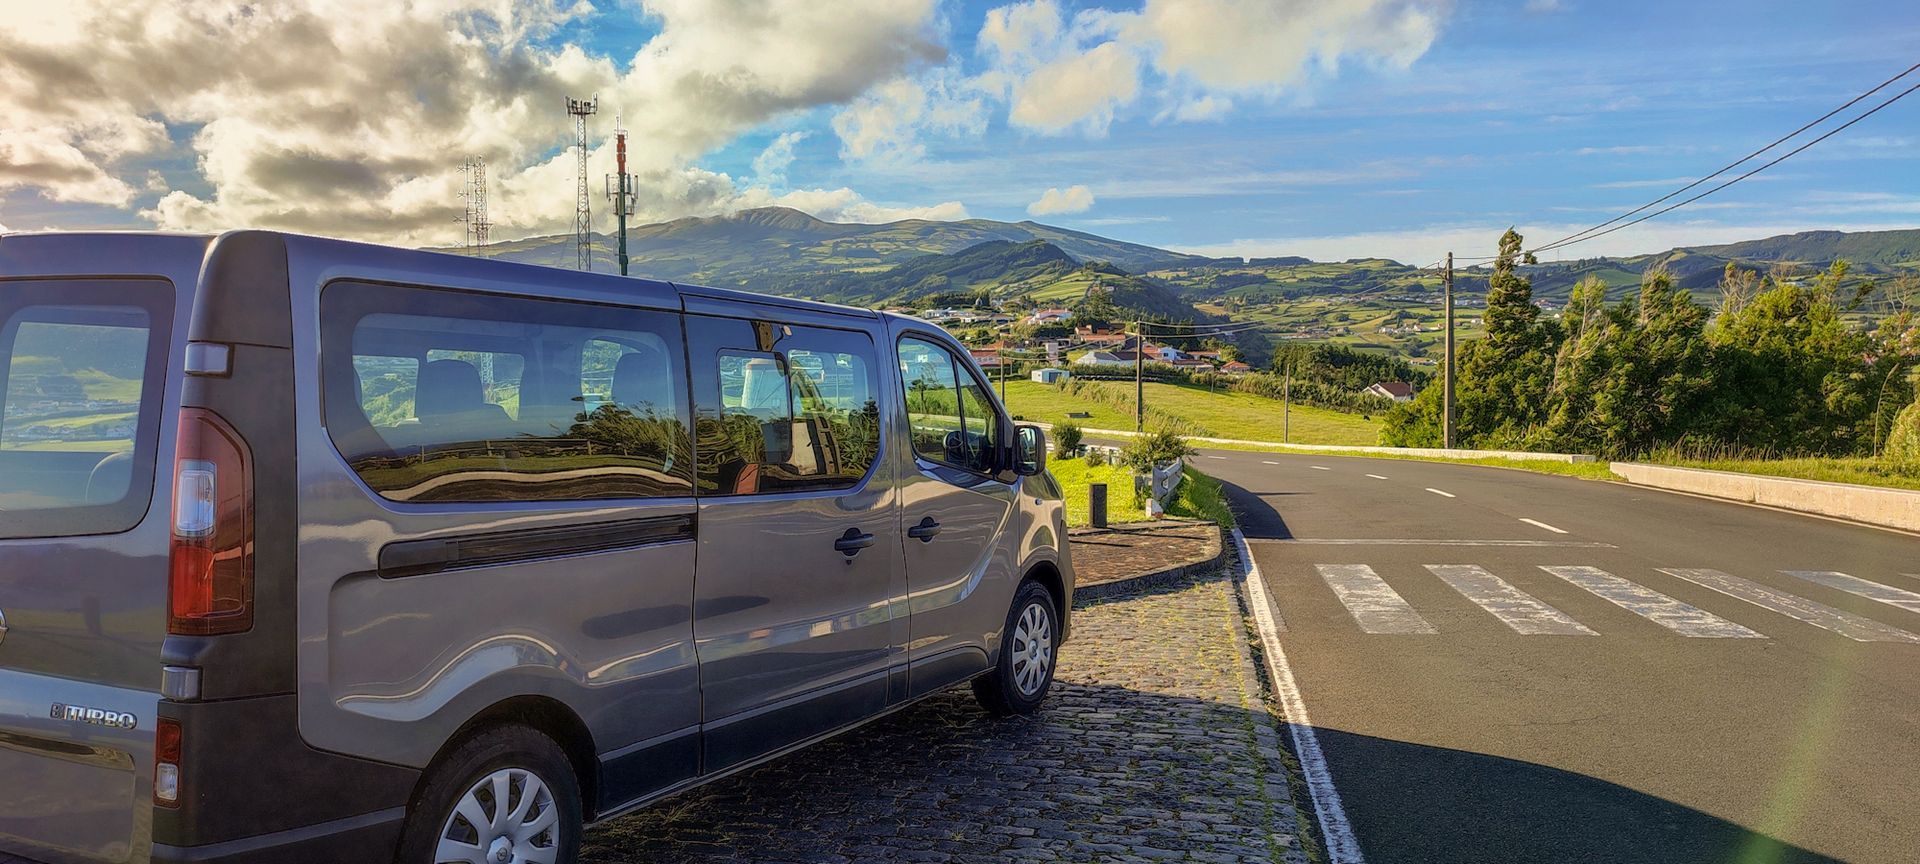 Full-day Excursions, Tours and Guided Visits on the island of Faial Azores.